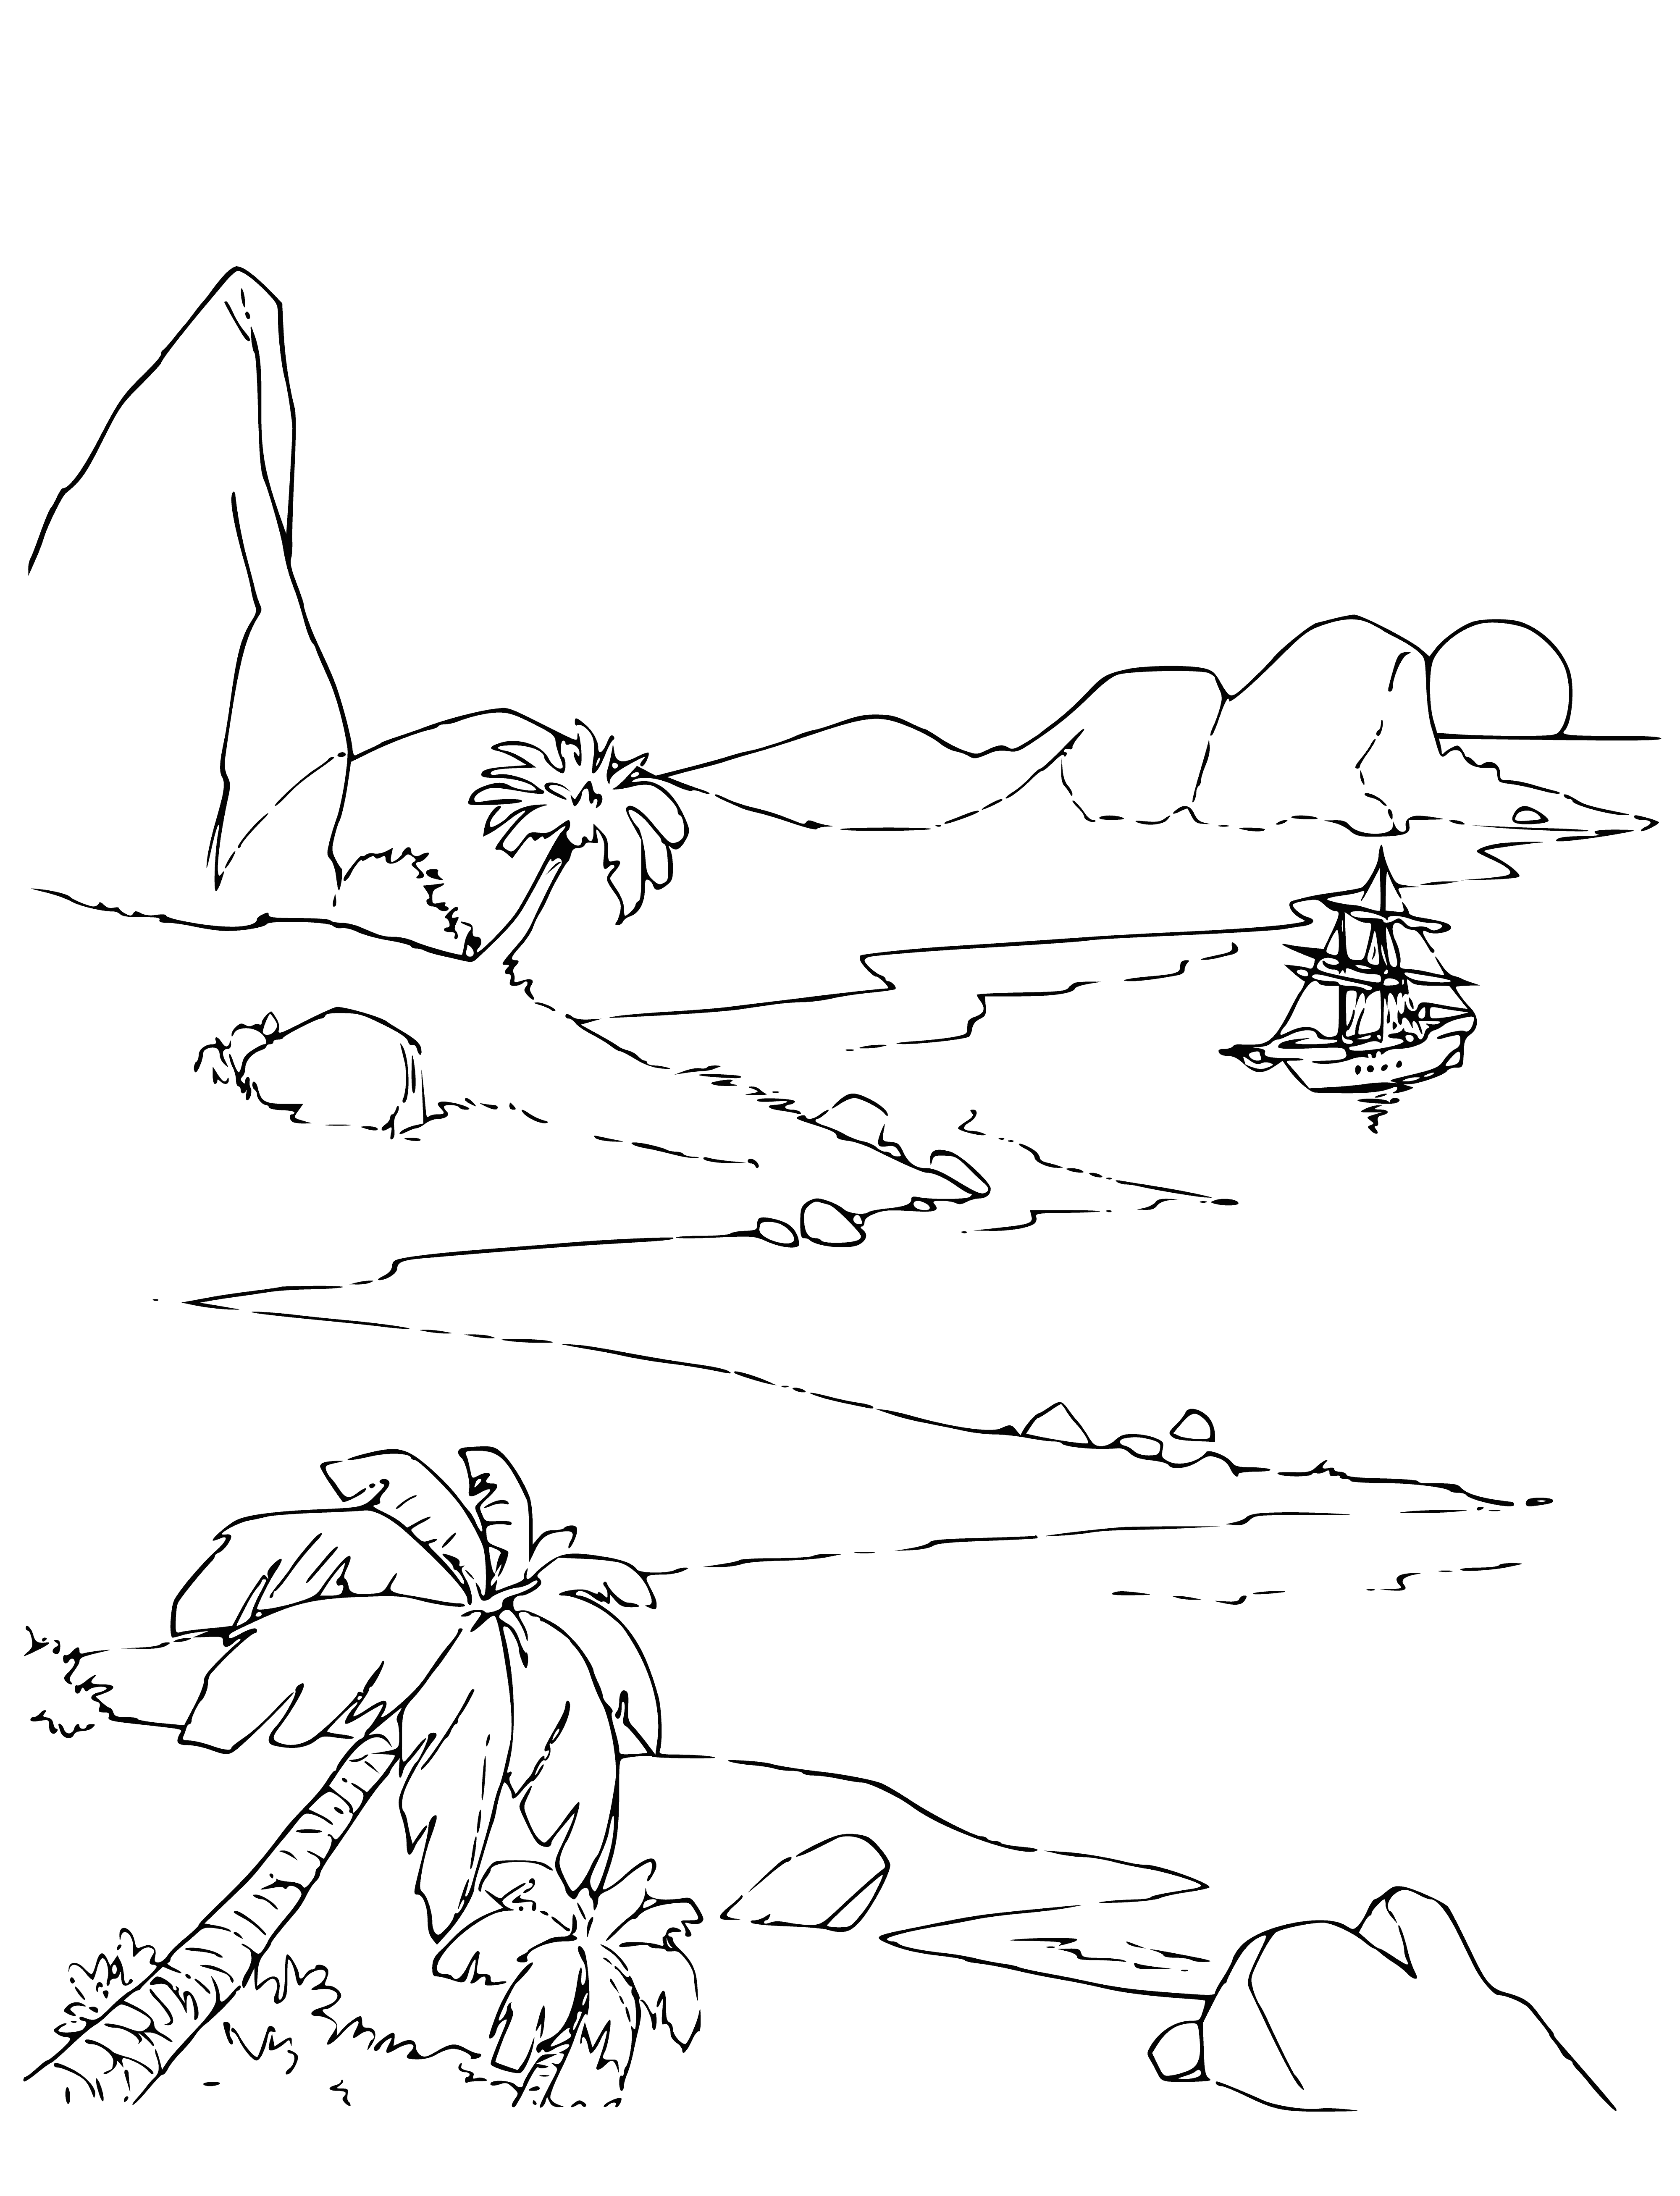 An uninhabited island coloring page